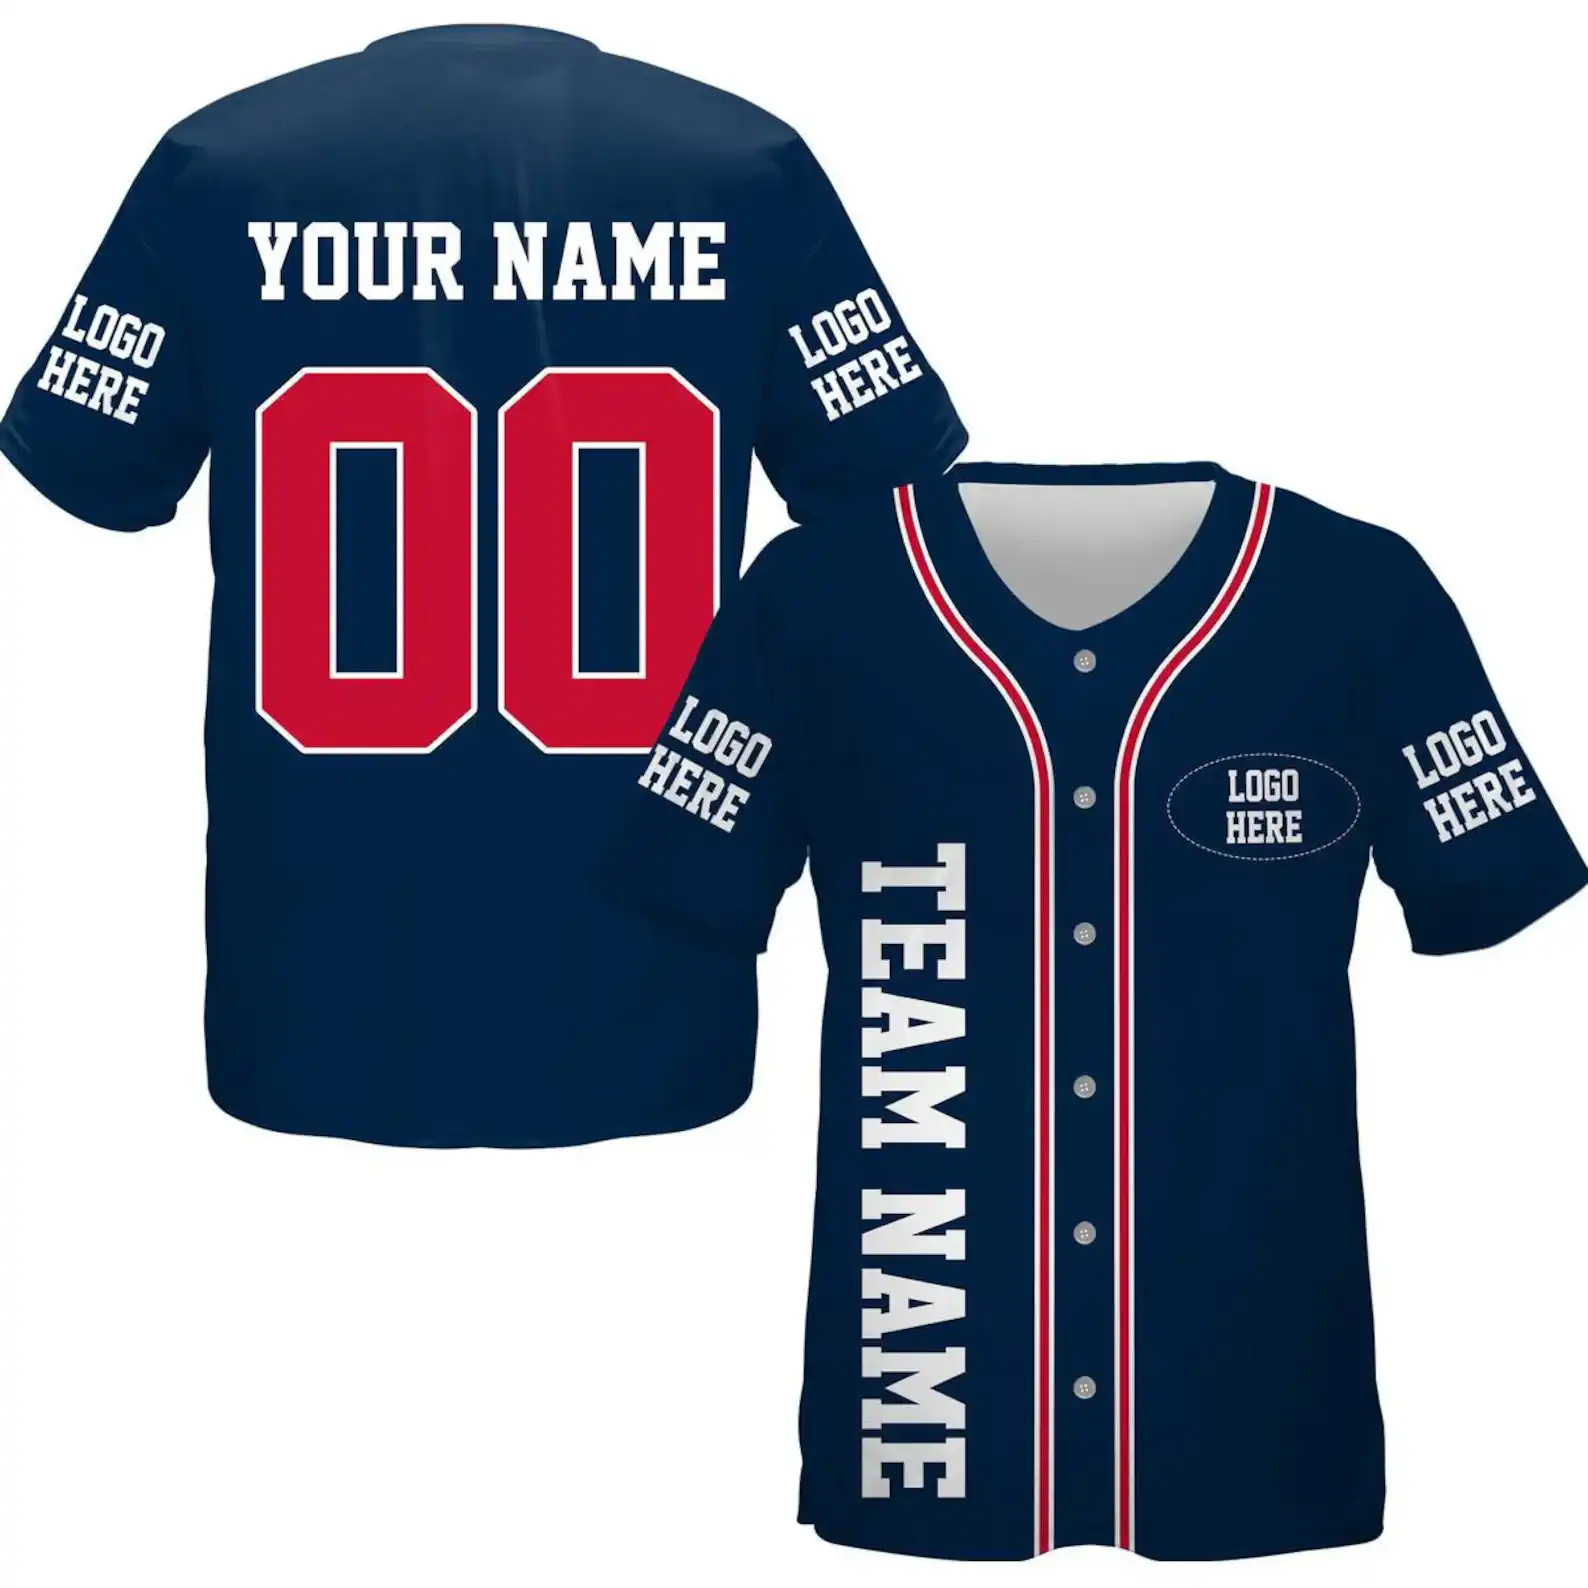 Personalized New England Football Team Idea Gift For Fans Baseball Jersey